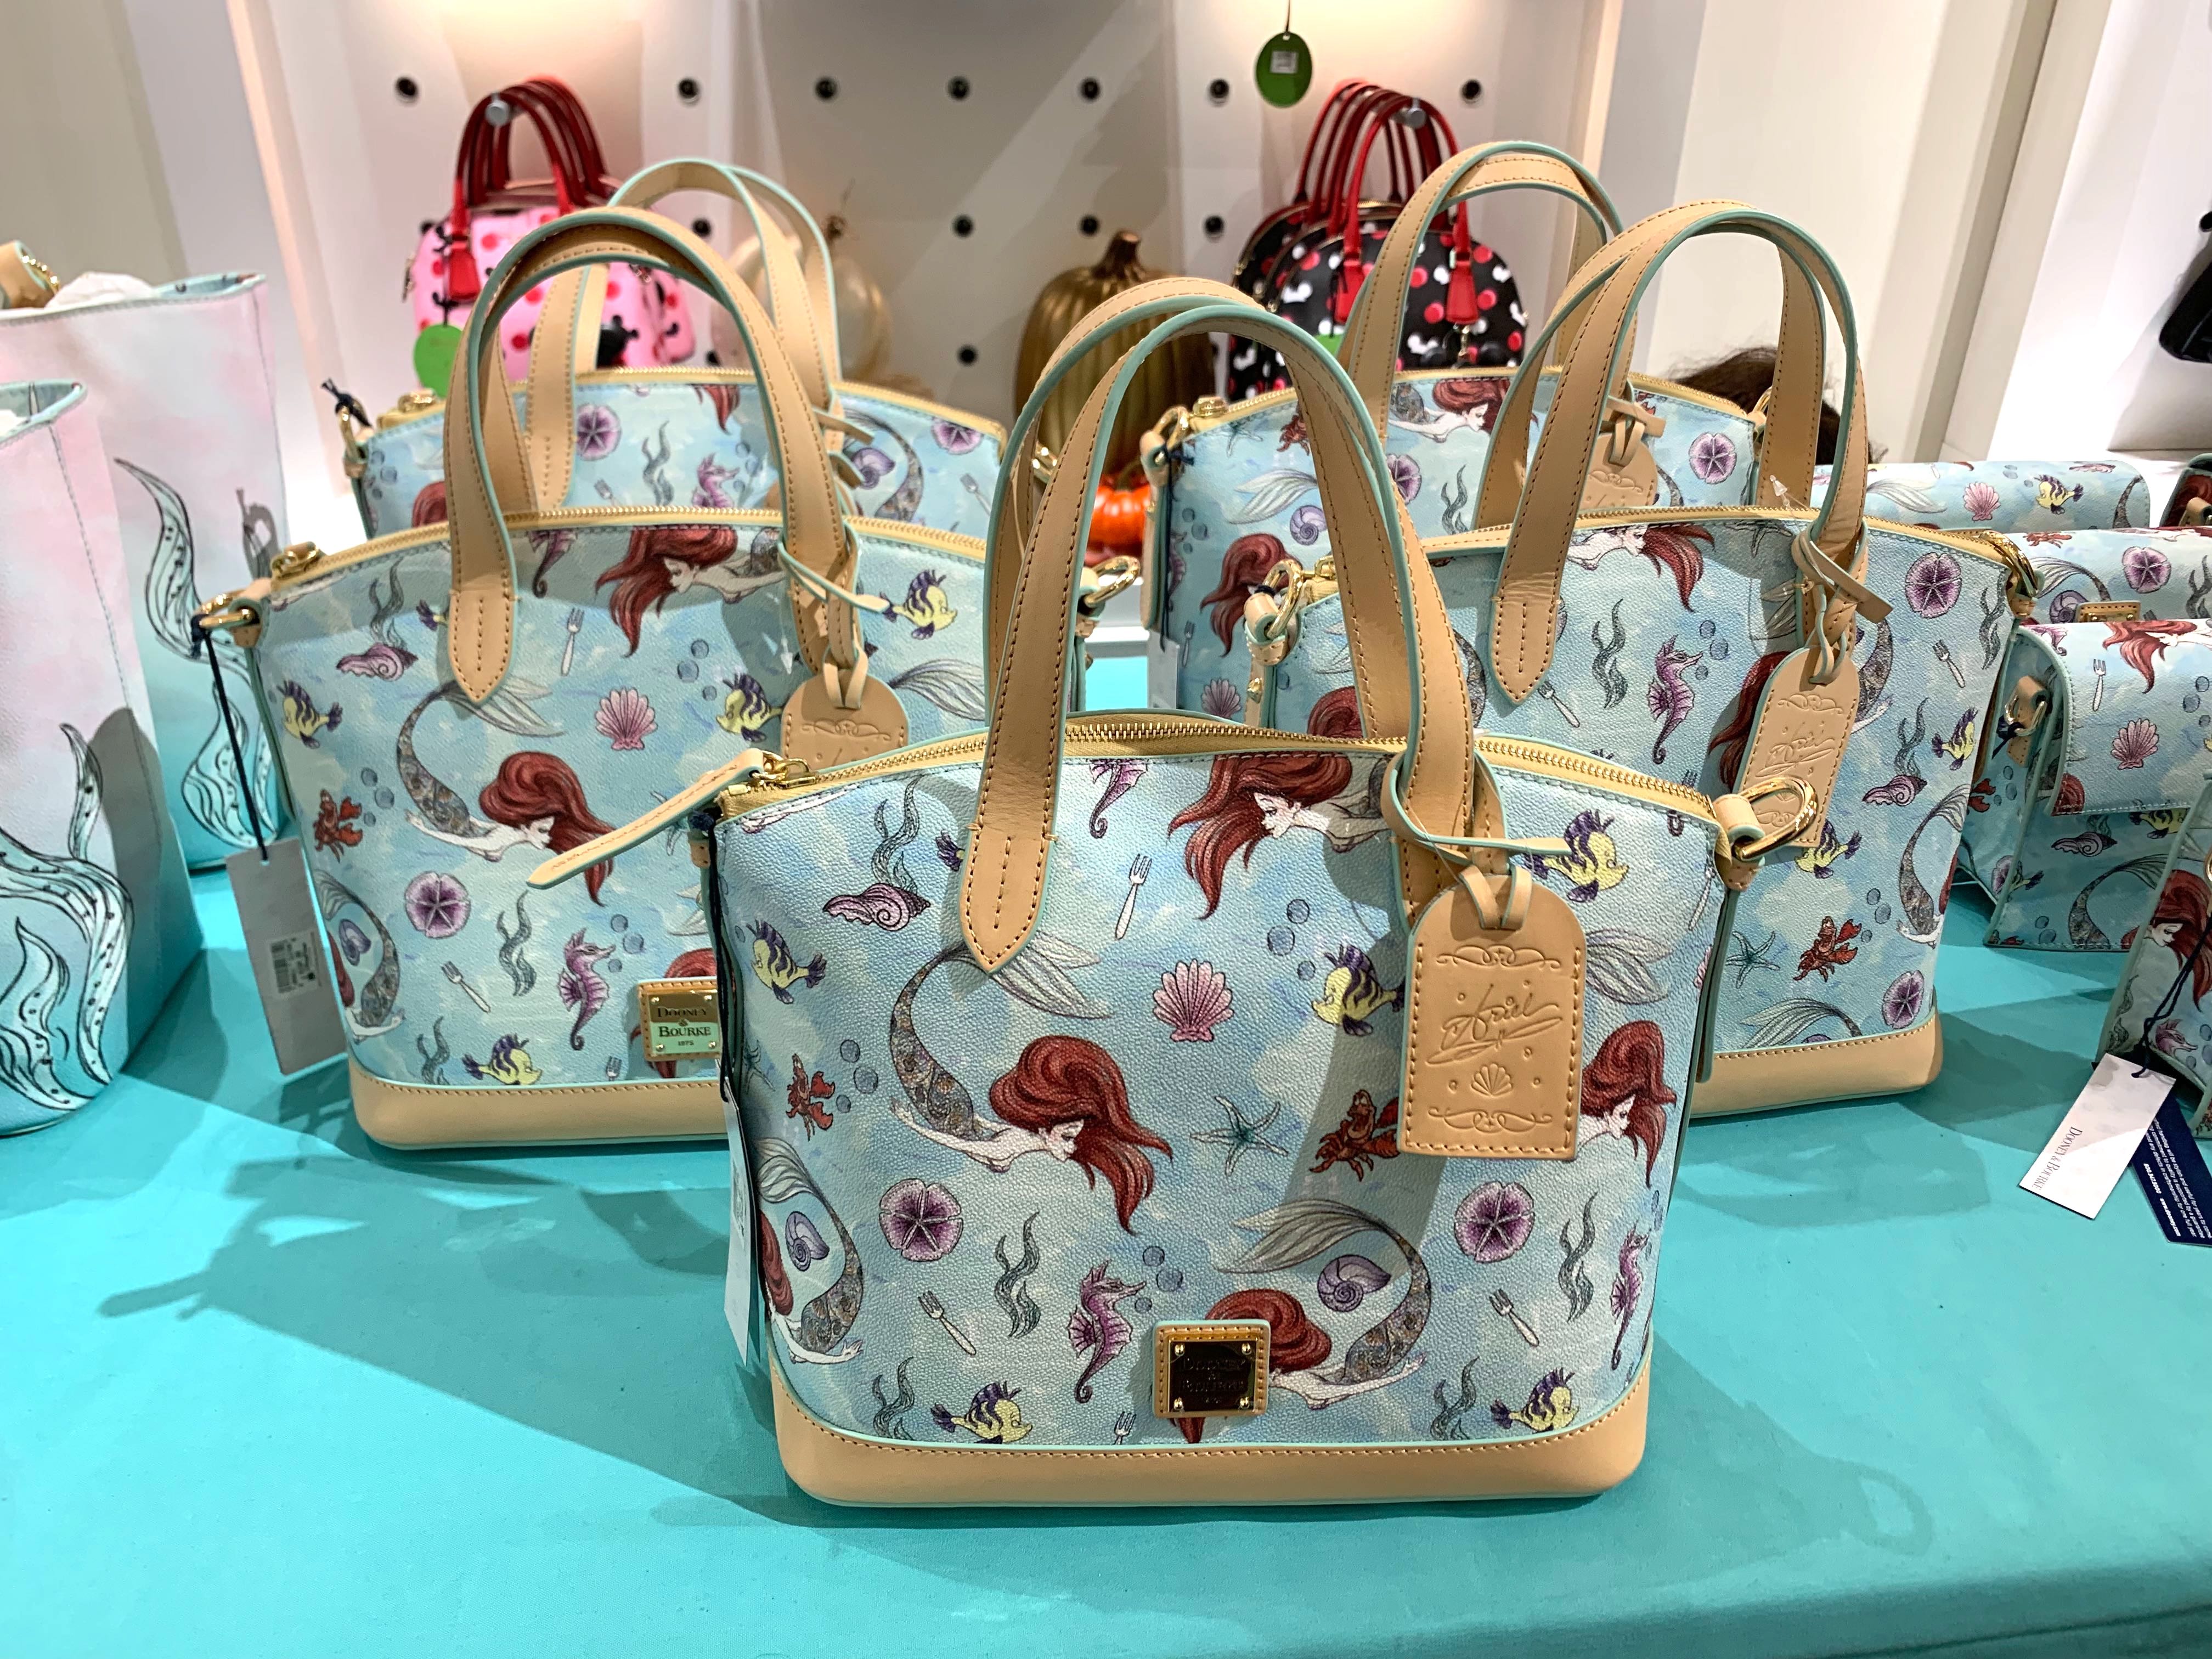 PHOTOS: New “The Little Mermaid” Dooney & Bourke Purse Collection Now ...